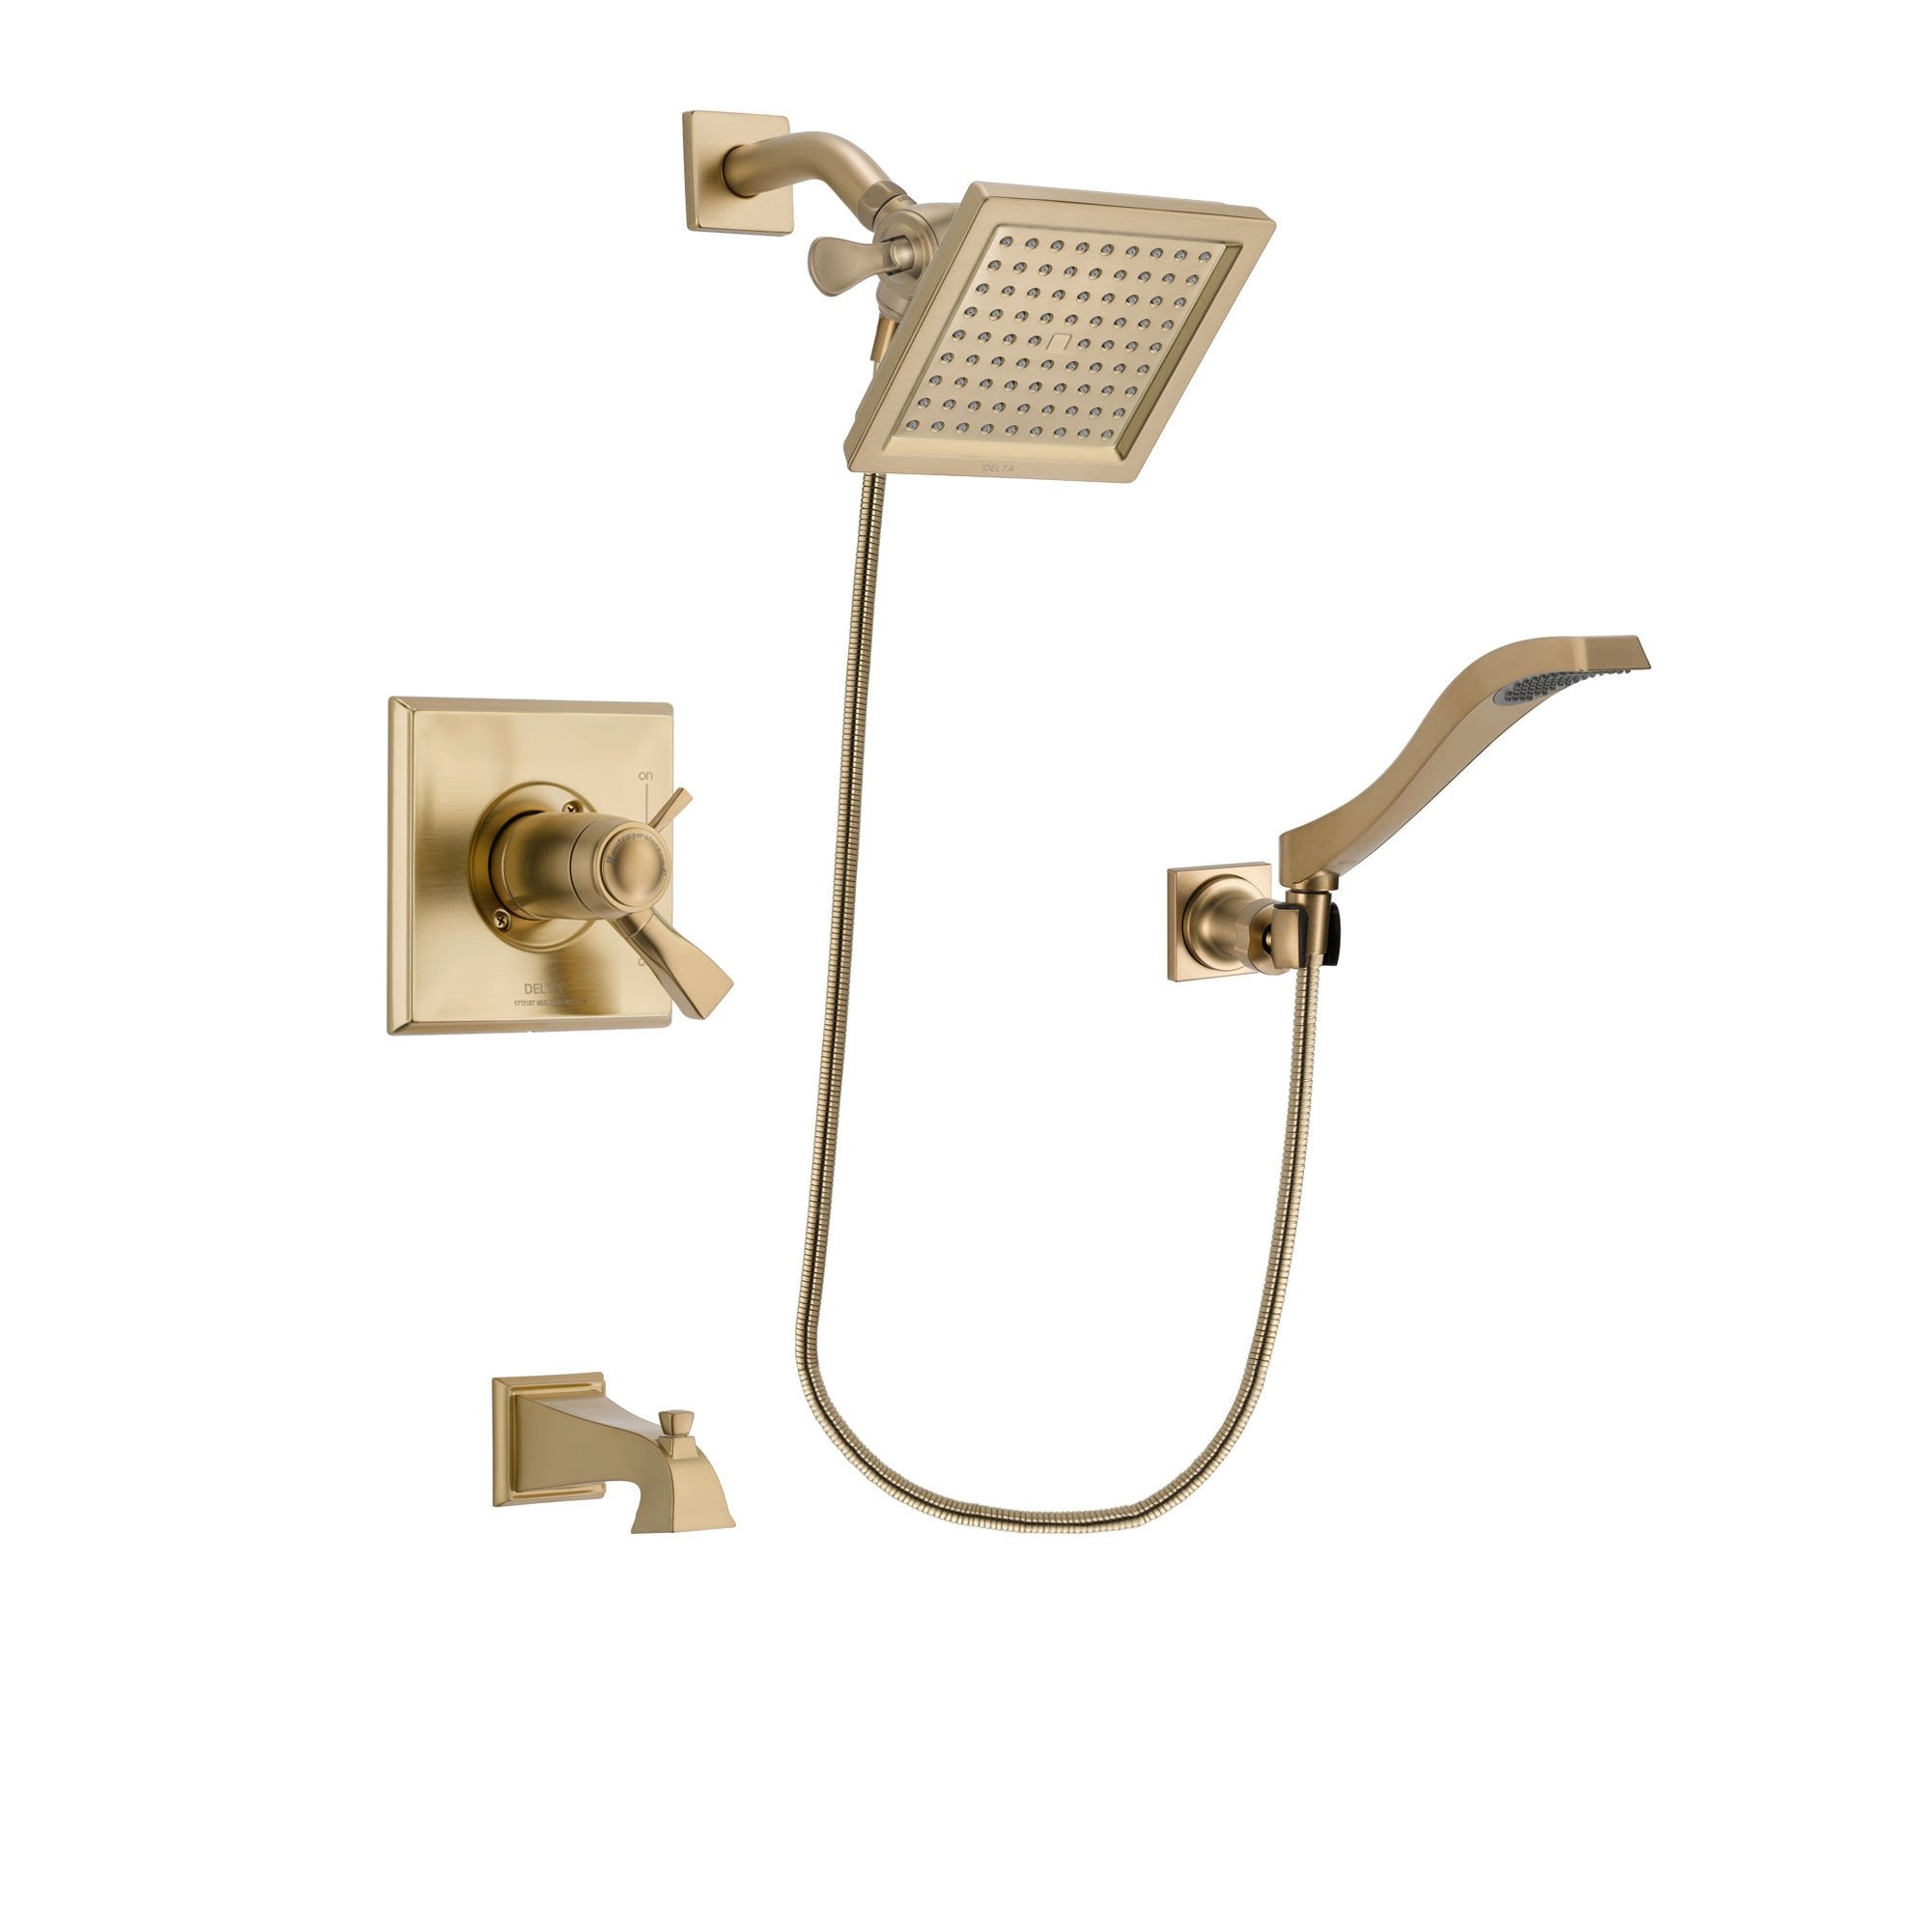 Delta Dryden Champagne Bronze Finish Thermostatic Tub and Shower Faucet System Package with 6.5-inch Square Rain Showerhead and Modern Wall Mount Handheld Shower Spray Includes Rough-in Valve and Tub Spout DSP3849V